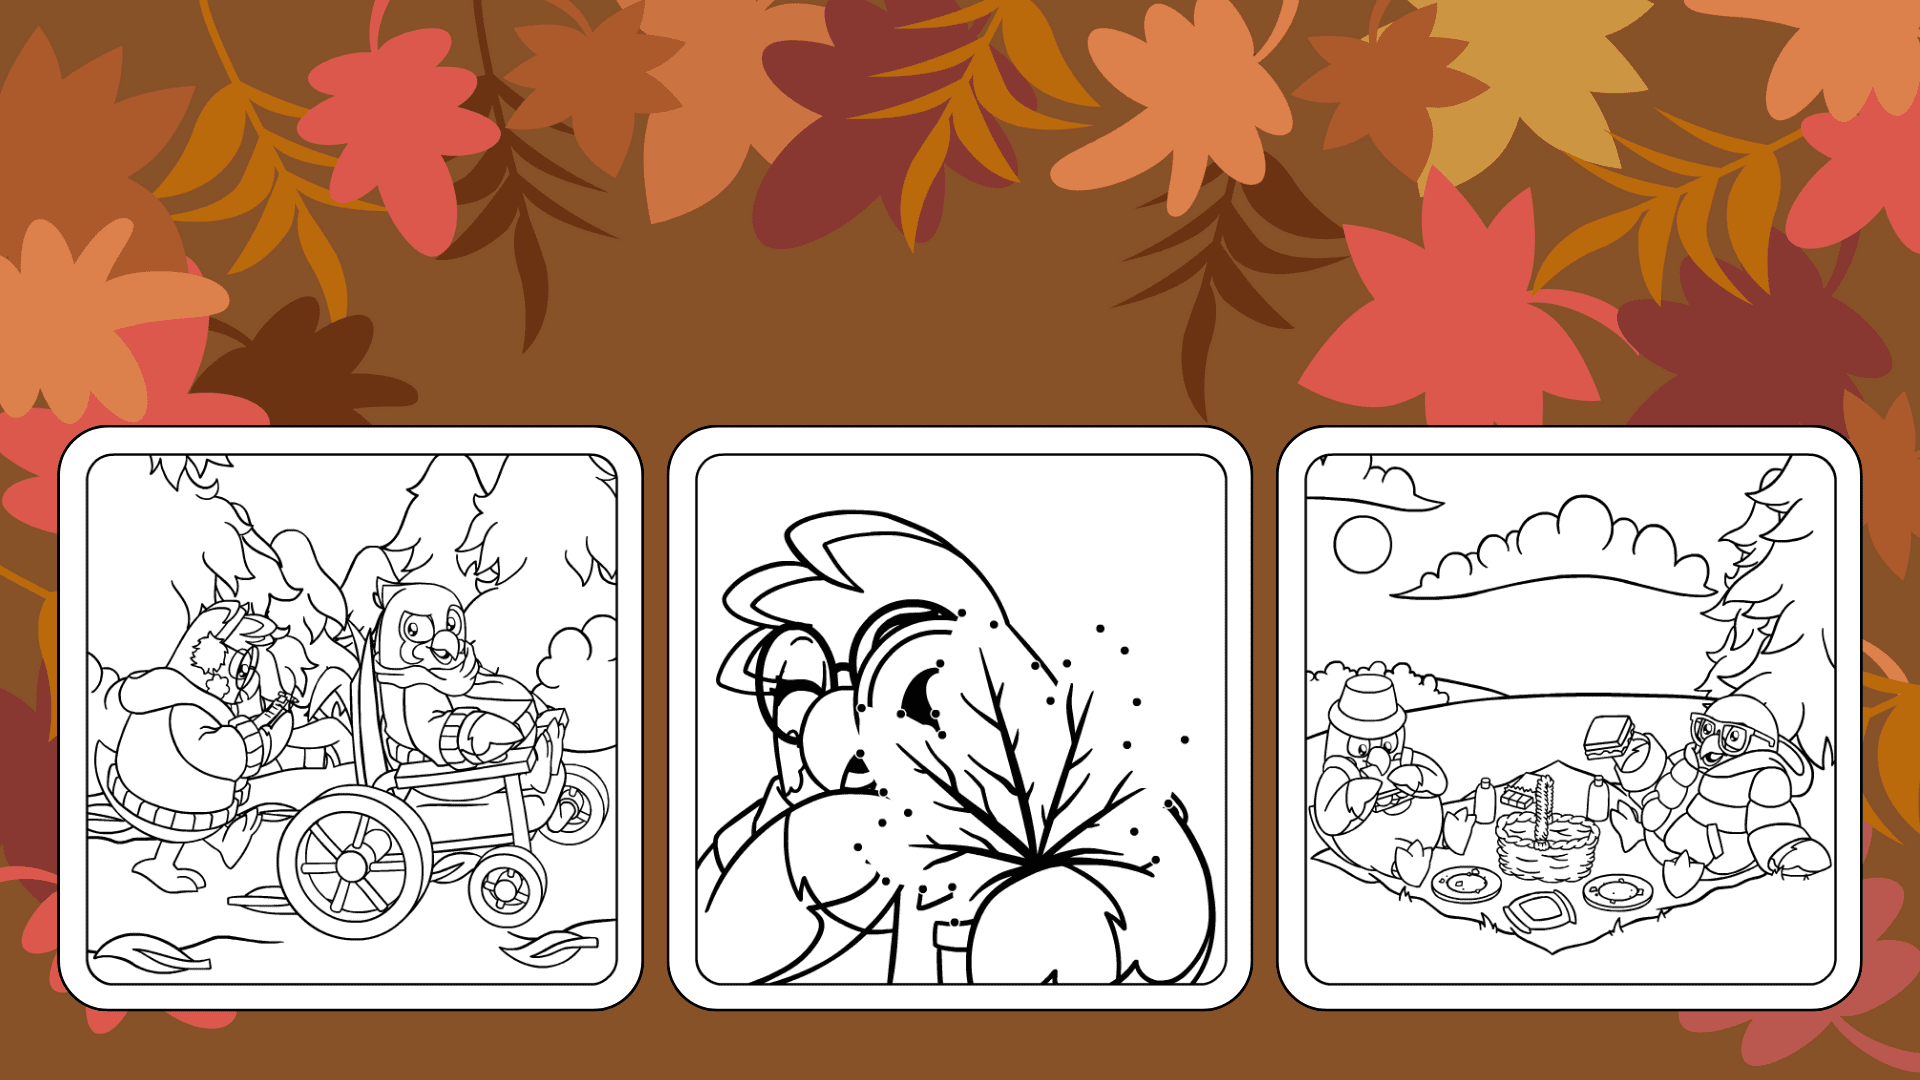 A layout of three happy fall coloring pages for kids. The brown background shows fall leaves in red, yellow, and brown.